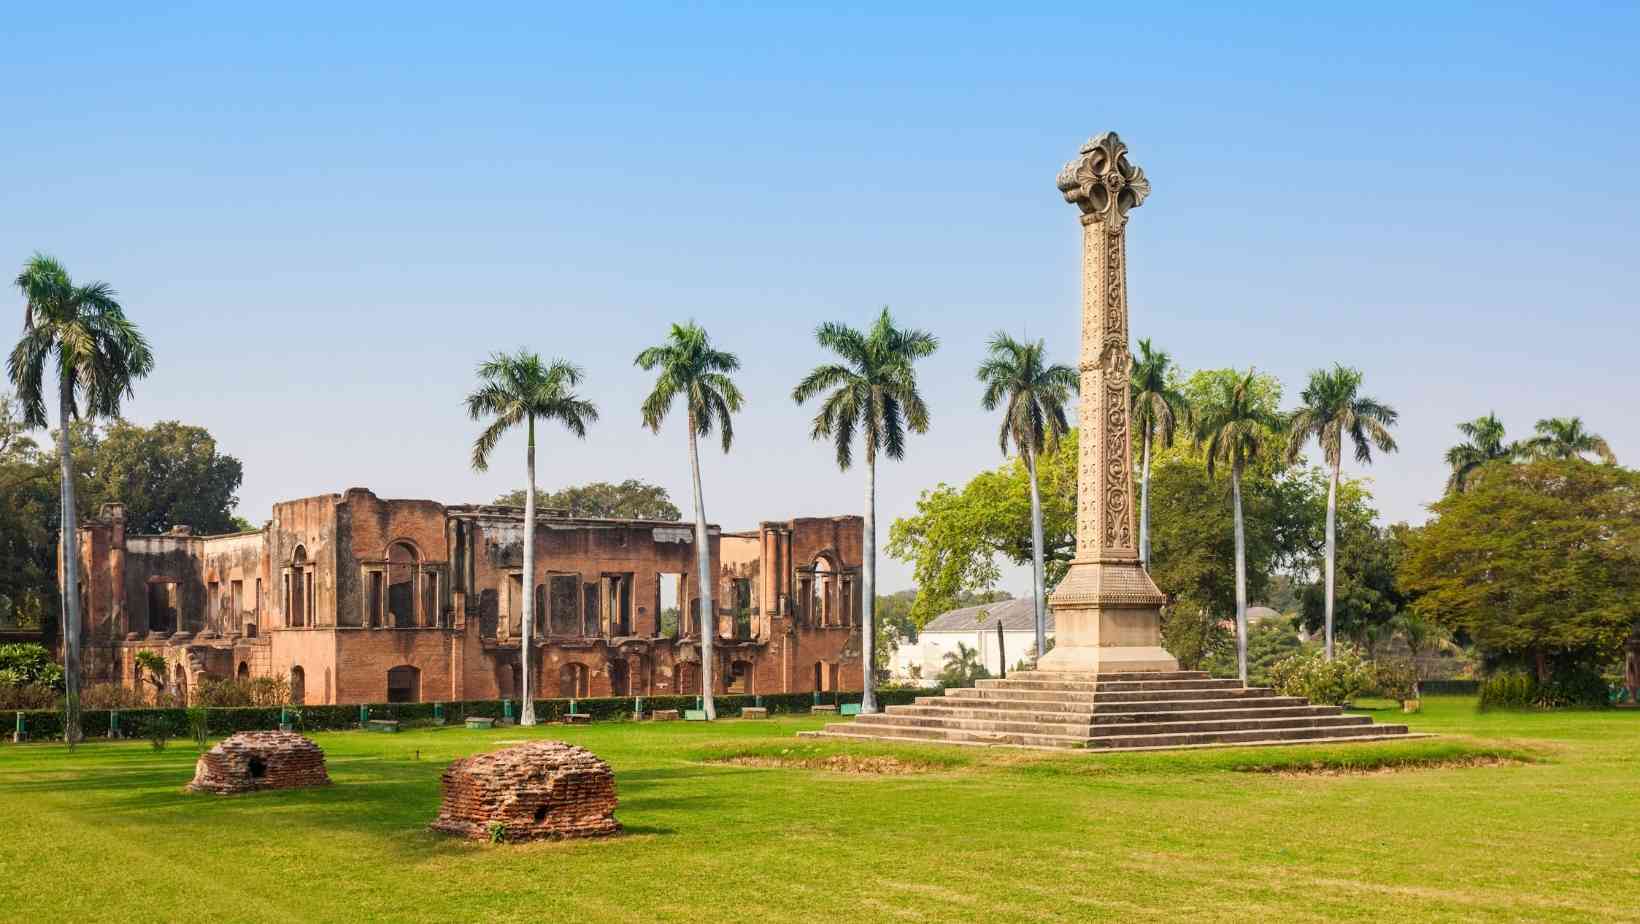 The British Residency in Lucknow